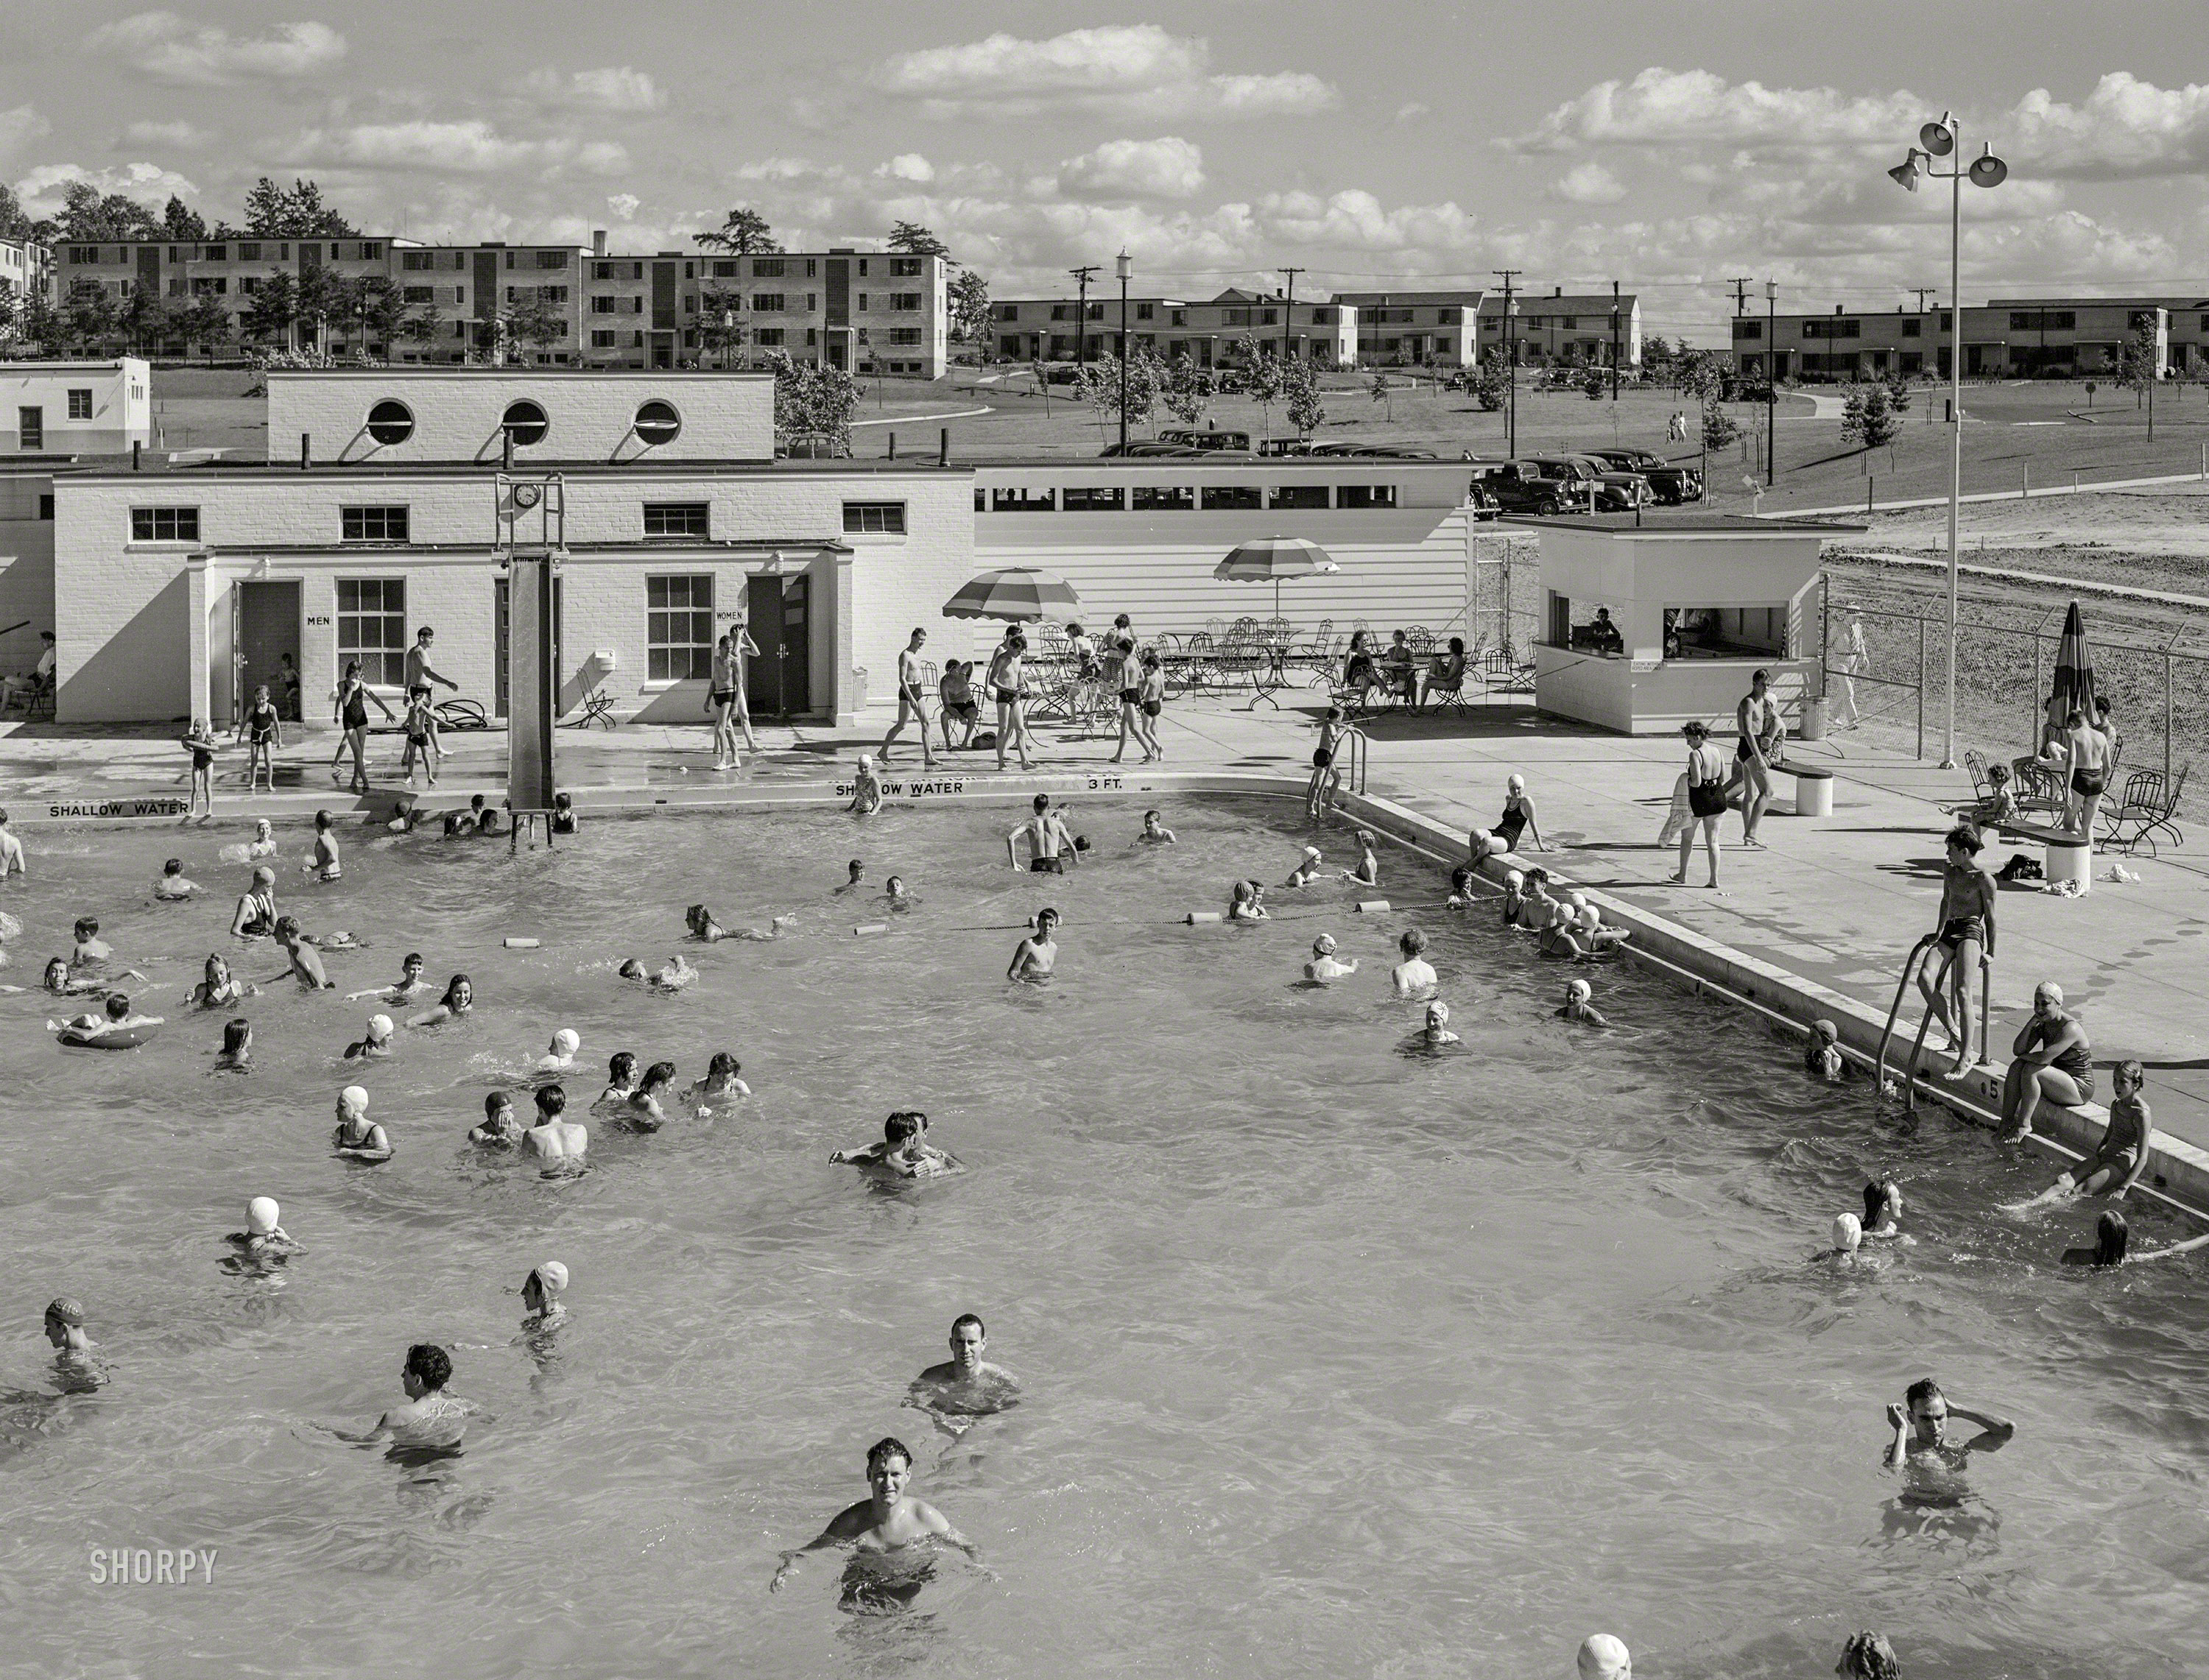 June 1939. "Community swimming pool at Greenbelt, Maryland." Medium format acetate negative by Marion Post Wolcott for the Farm Security Administration. View full size.